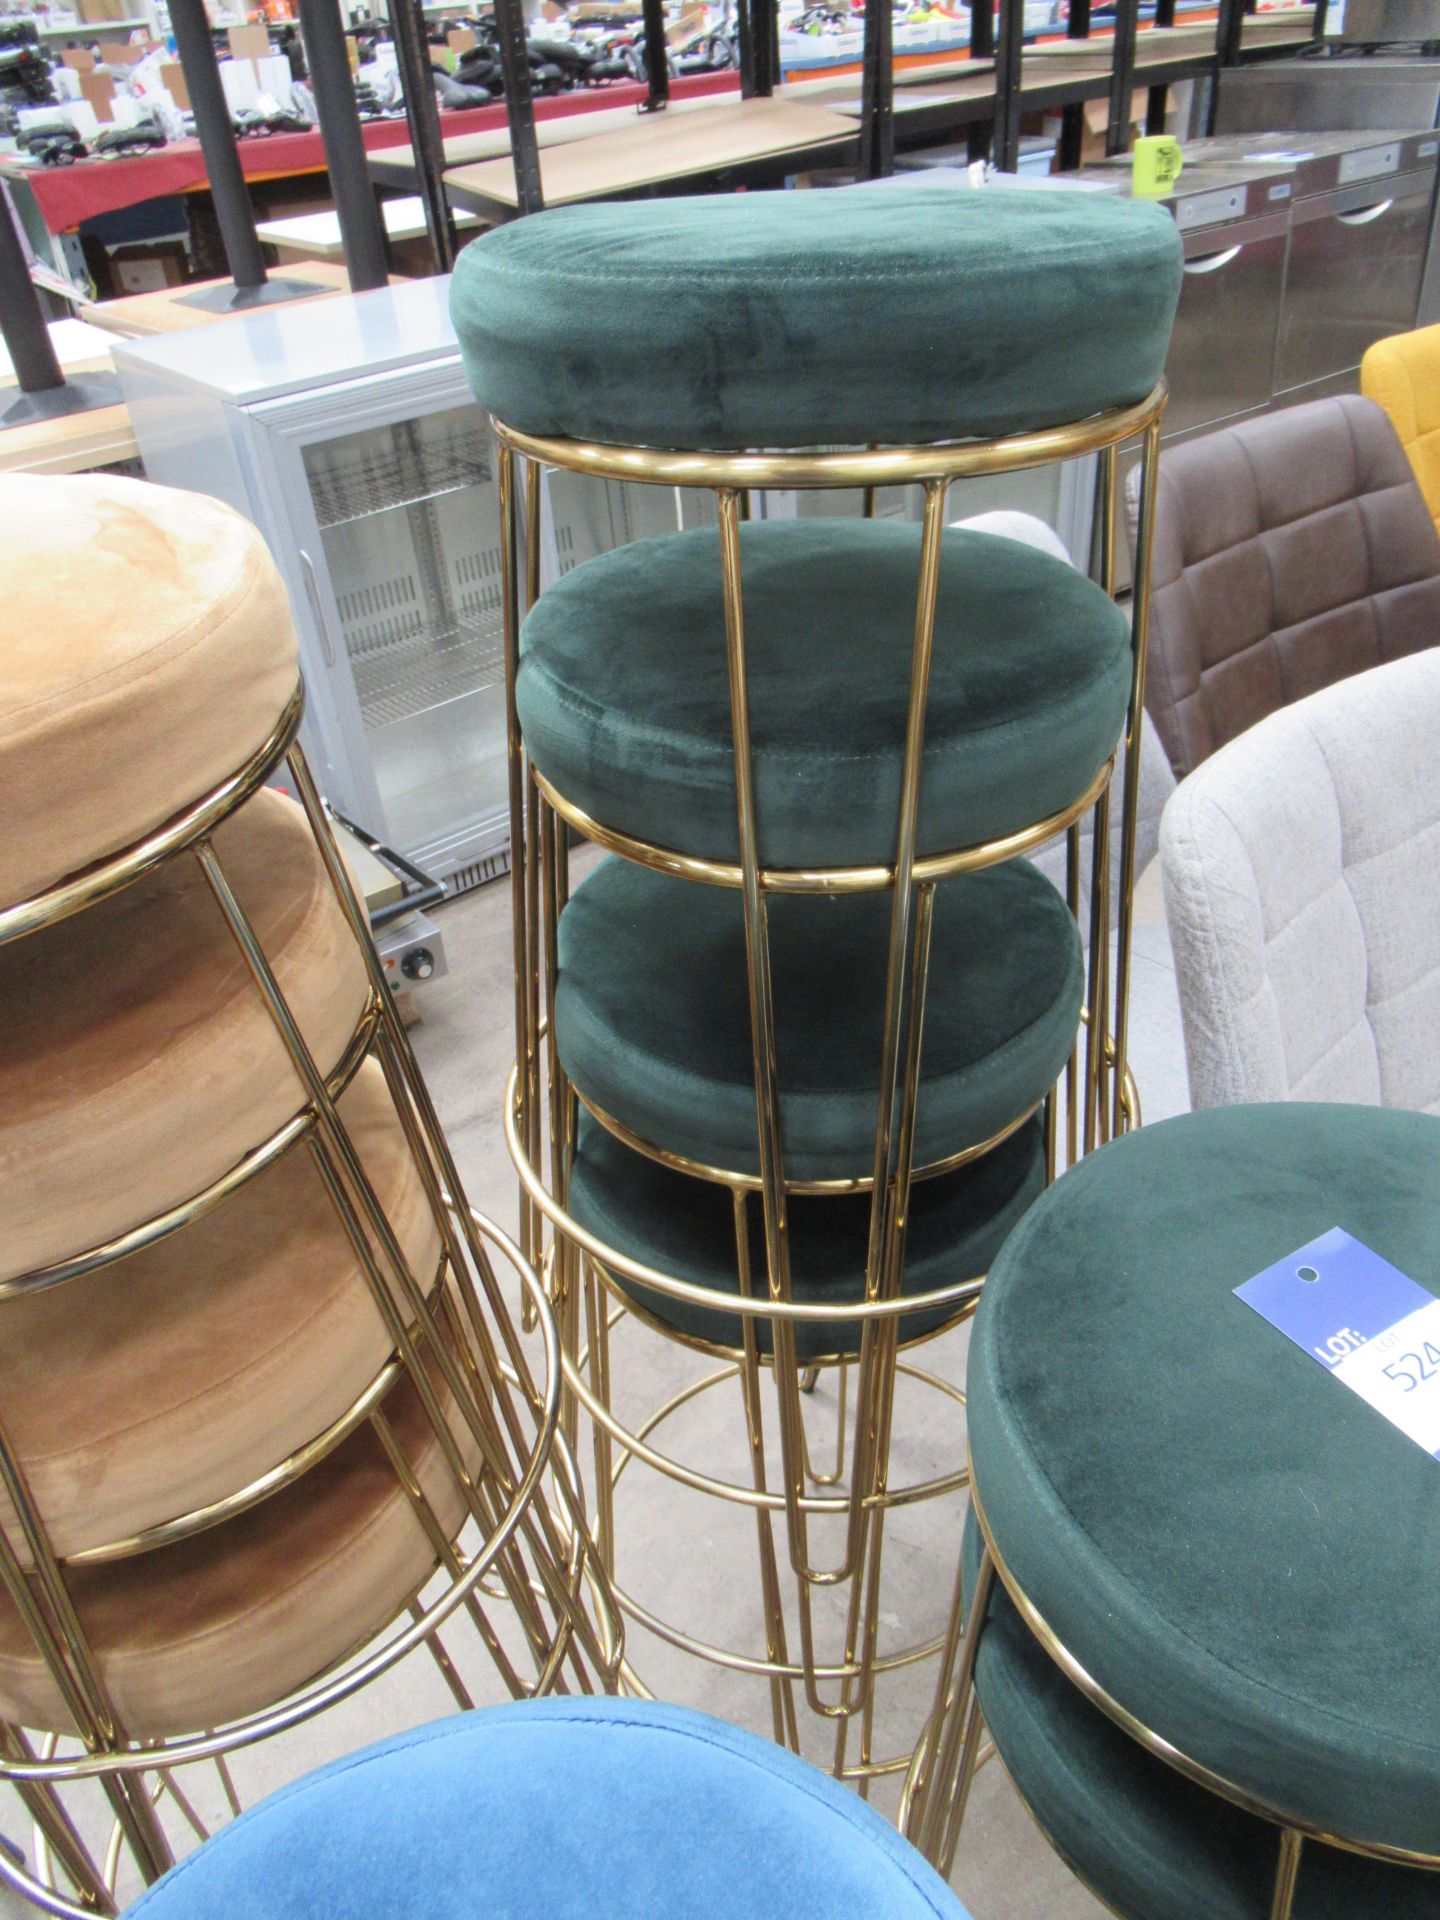 12x Suede Effect Stools - Image 6 of 7